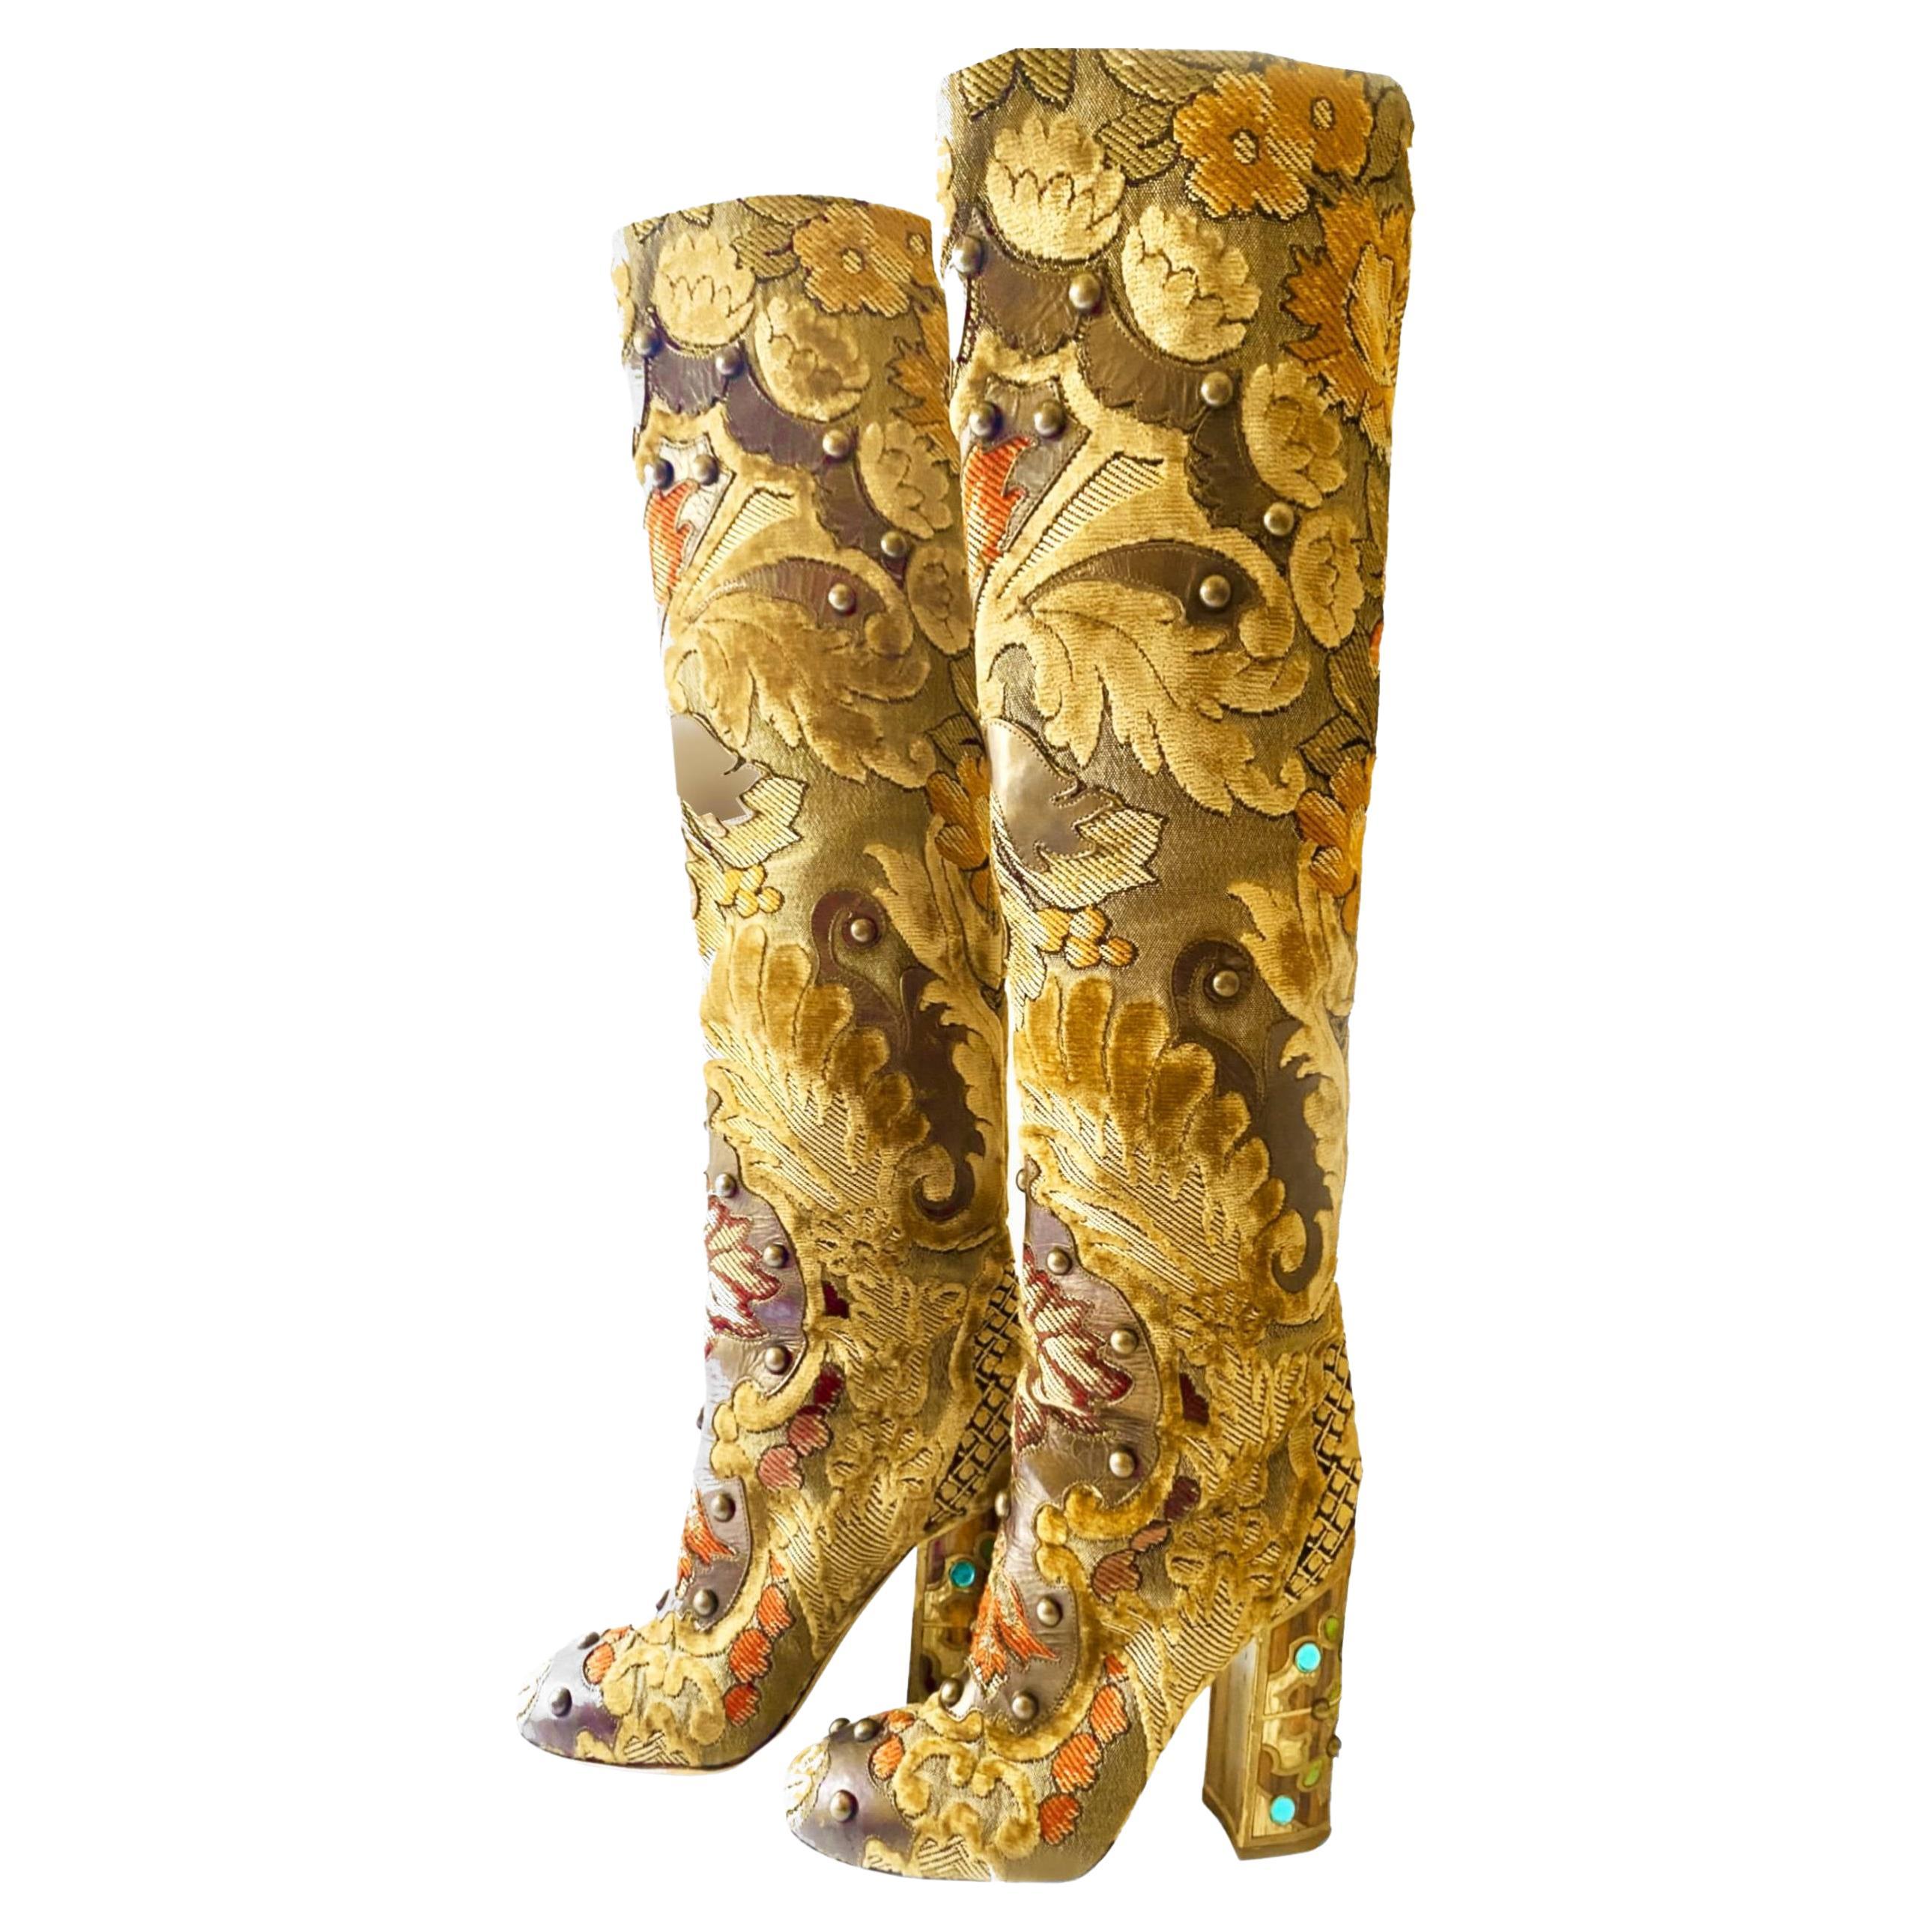 Dolce & Gabbana Brocade Fabric Over The Knee Jeweled Boots In Excellent Condition For Sale In London, GB